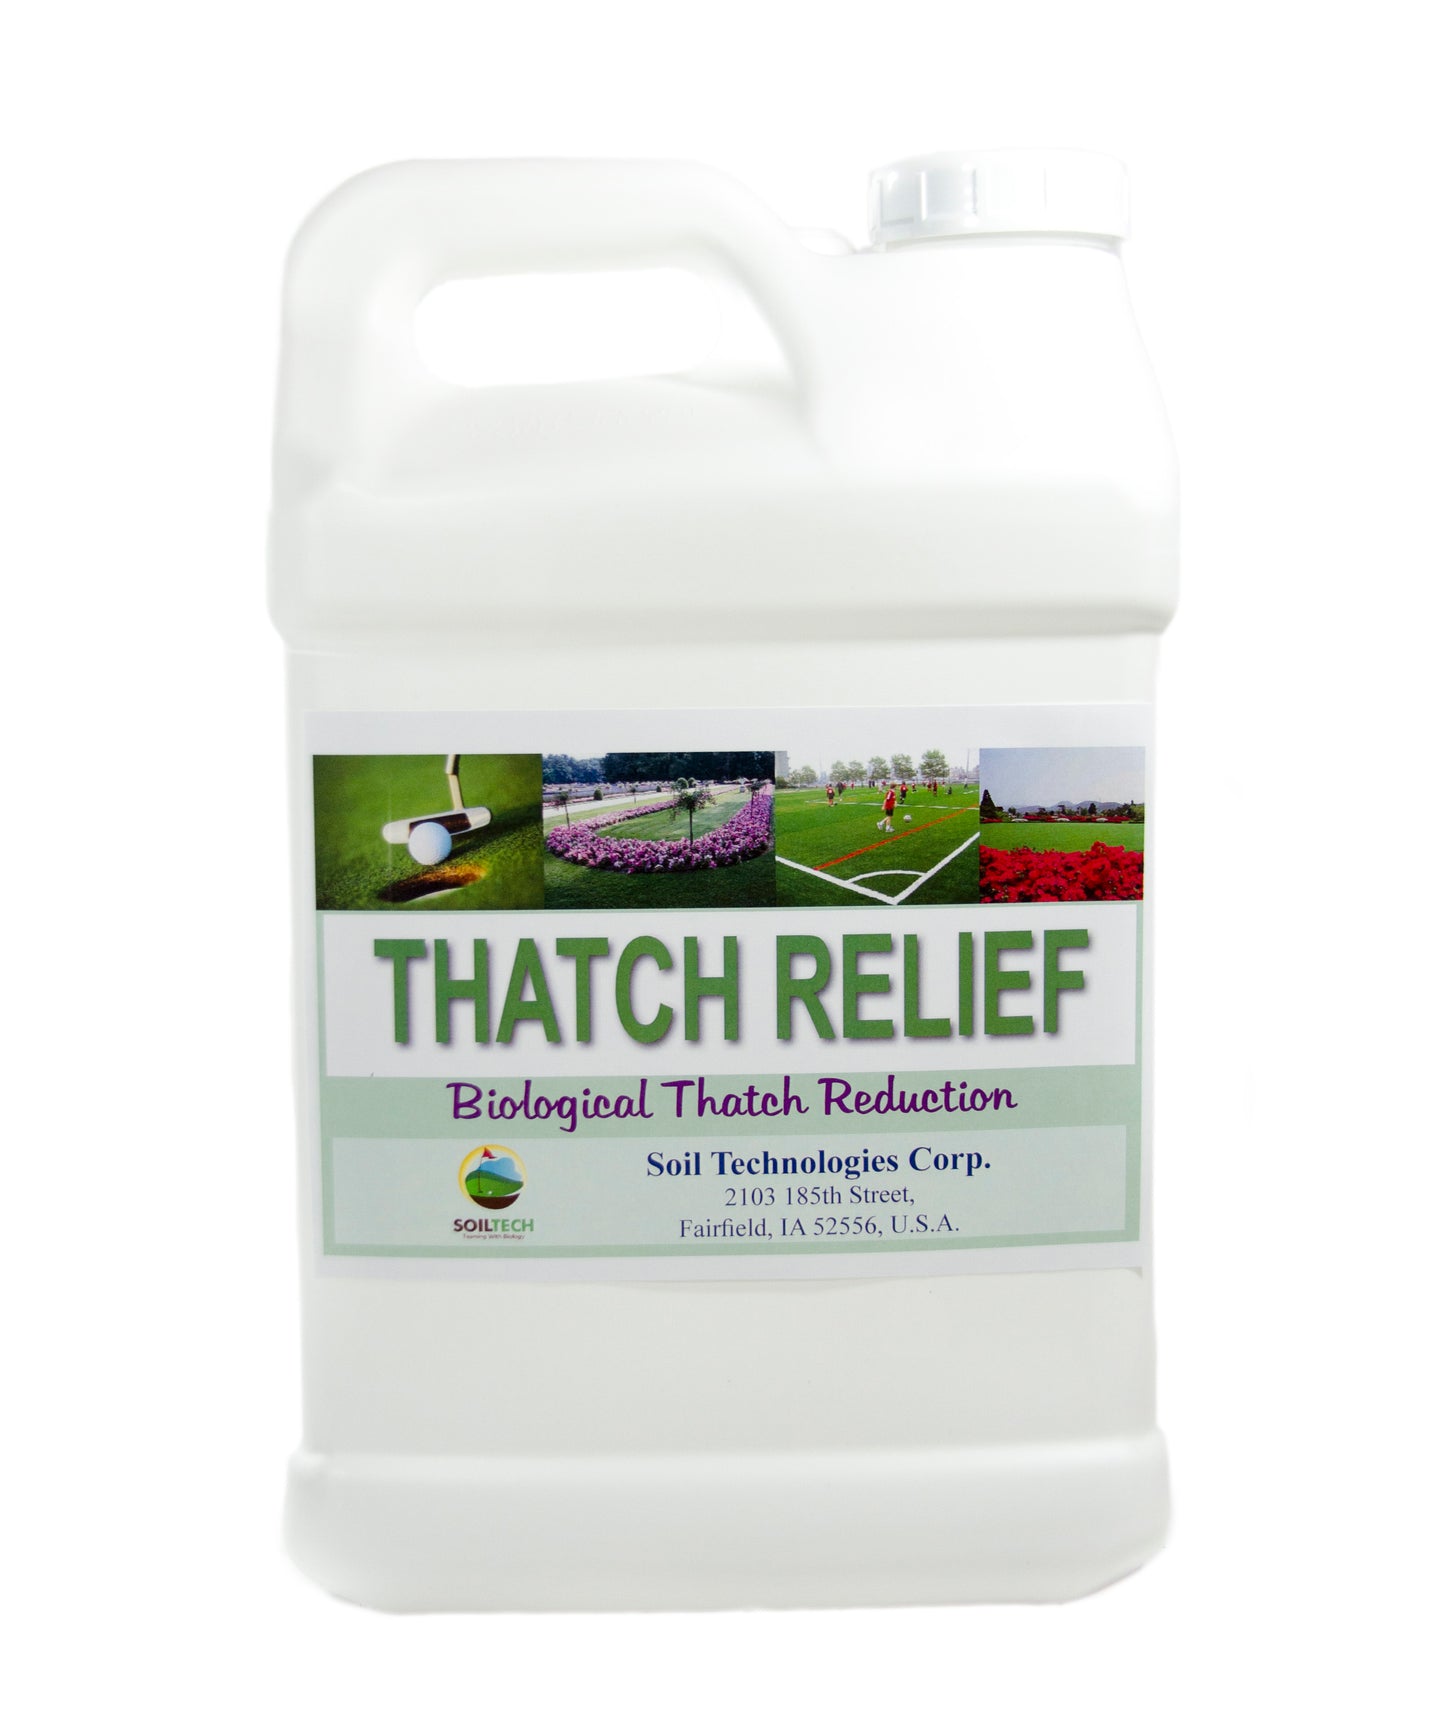 Thatch Relief- Biological Thatch Reduction from Soil Technologies Corp